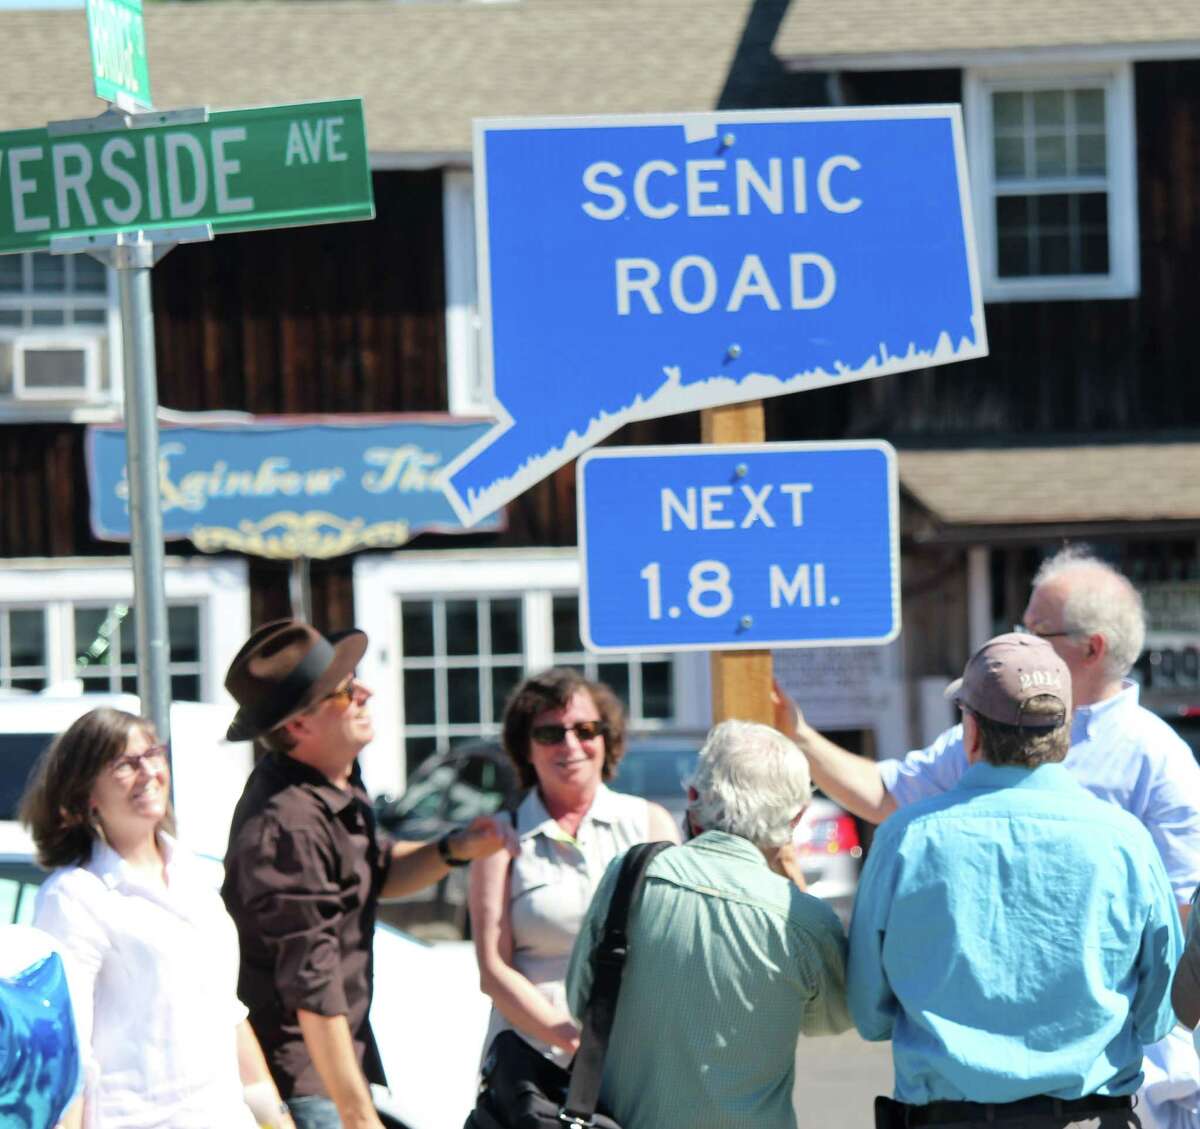 Morley Boyd and John Suggs admire the nelwy implemented scenic road sign on Route 136. The 1.8 mile scenic road, only the second in Westport, starts at the west end of the Bridge Street Bridge, officially known as the William F. Cribari Memorial Bridge.The designation runs until Route 136 intersects with the Post Road and Compo Road S.